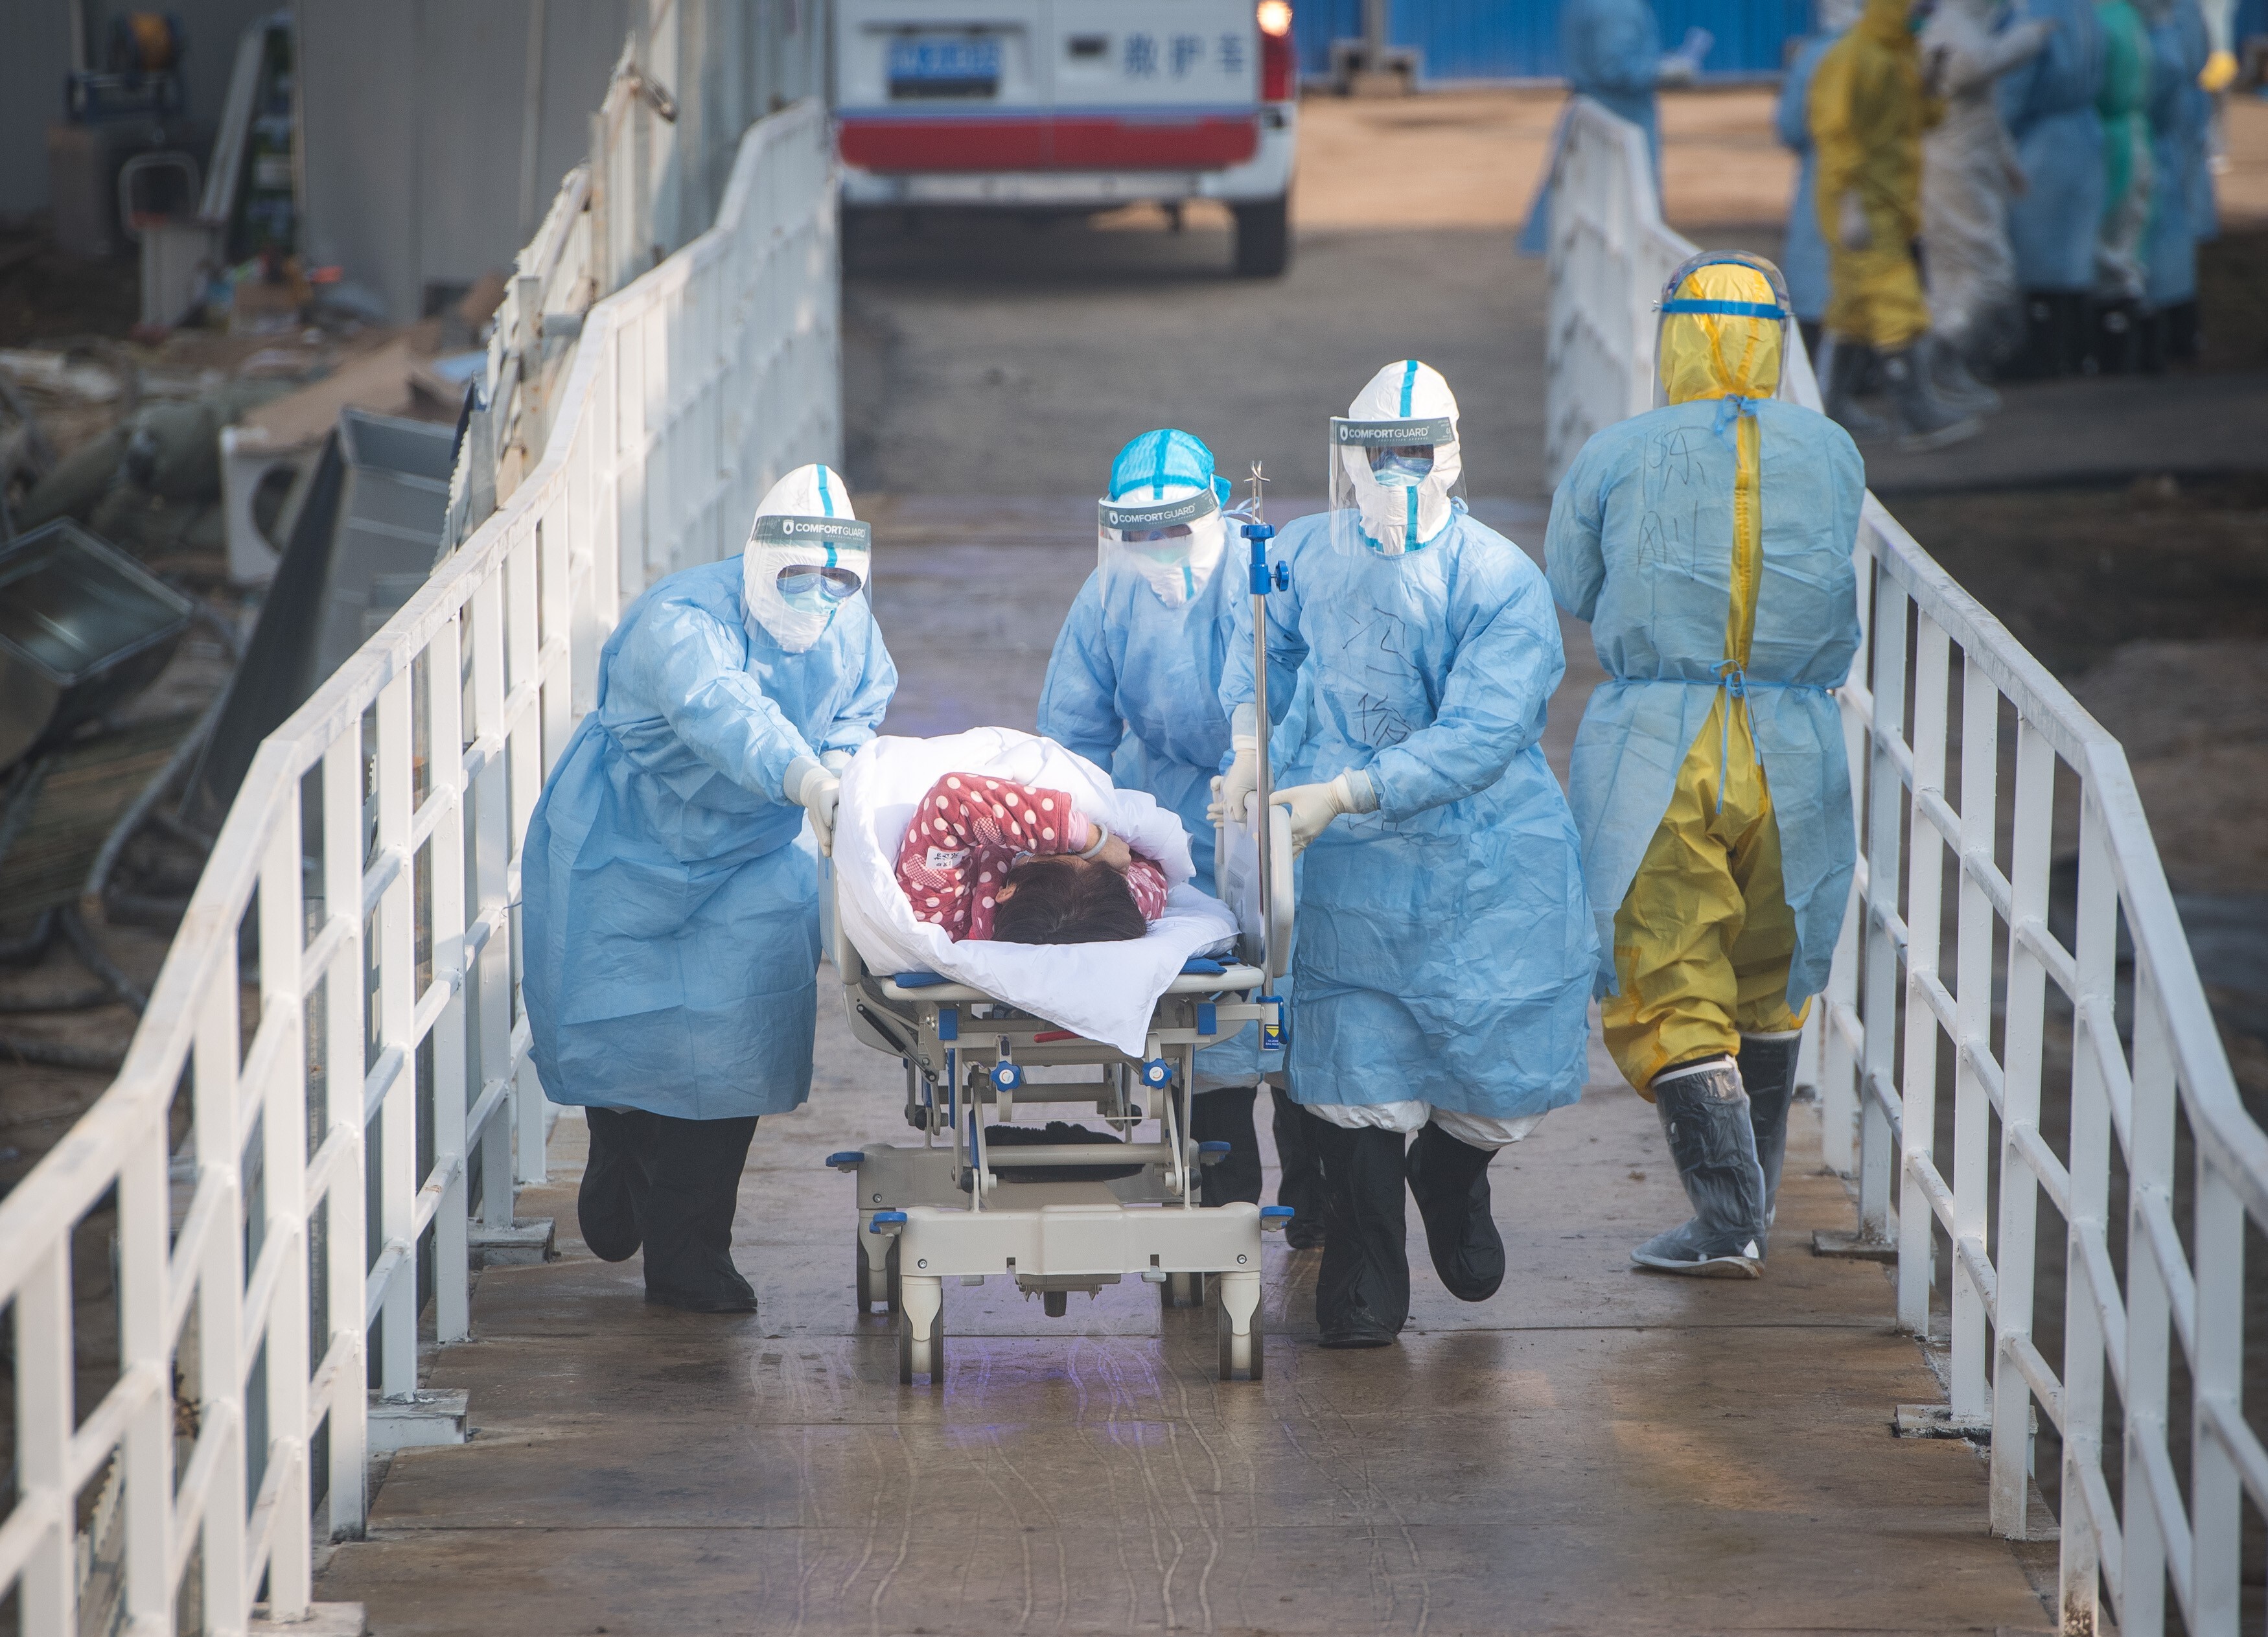 Professor Li Ling, from Peking University, says the pandemic has been a great social experiment for China to implement free public health care. Photo: Xinhua